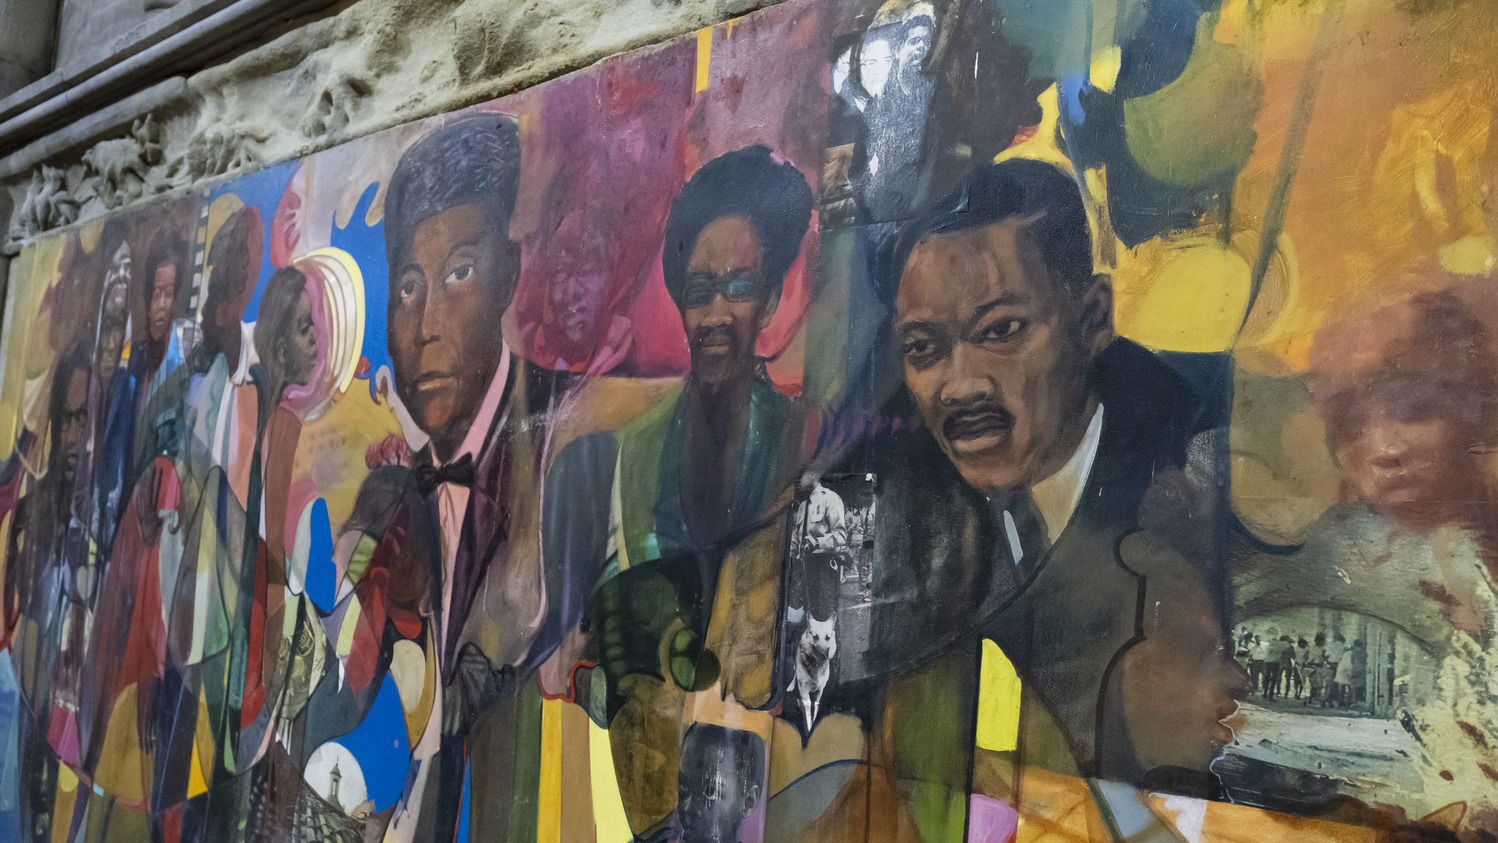 Image of Black history mural inside the Church of Advocate.